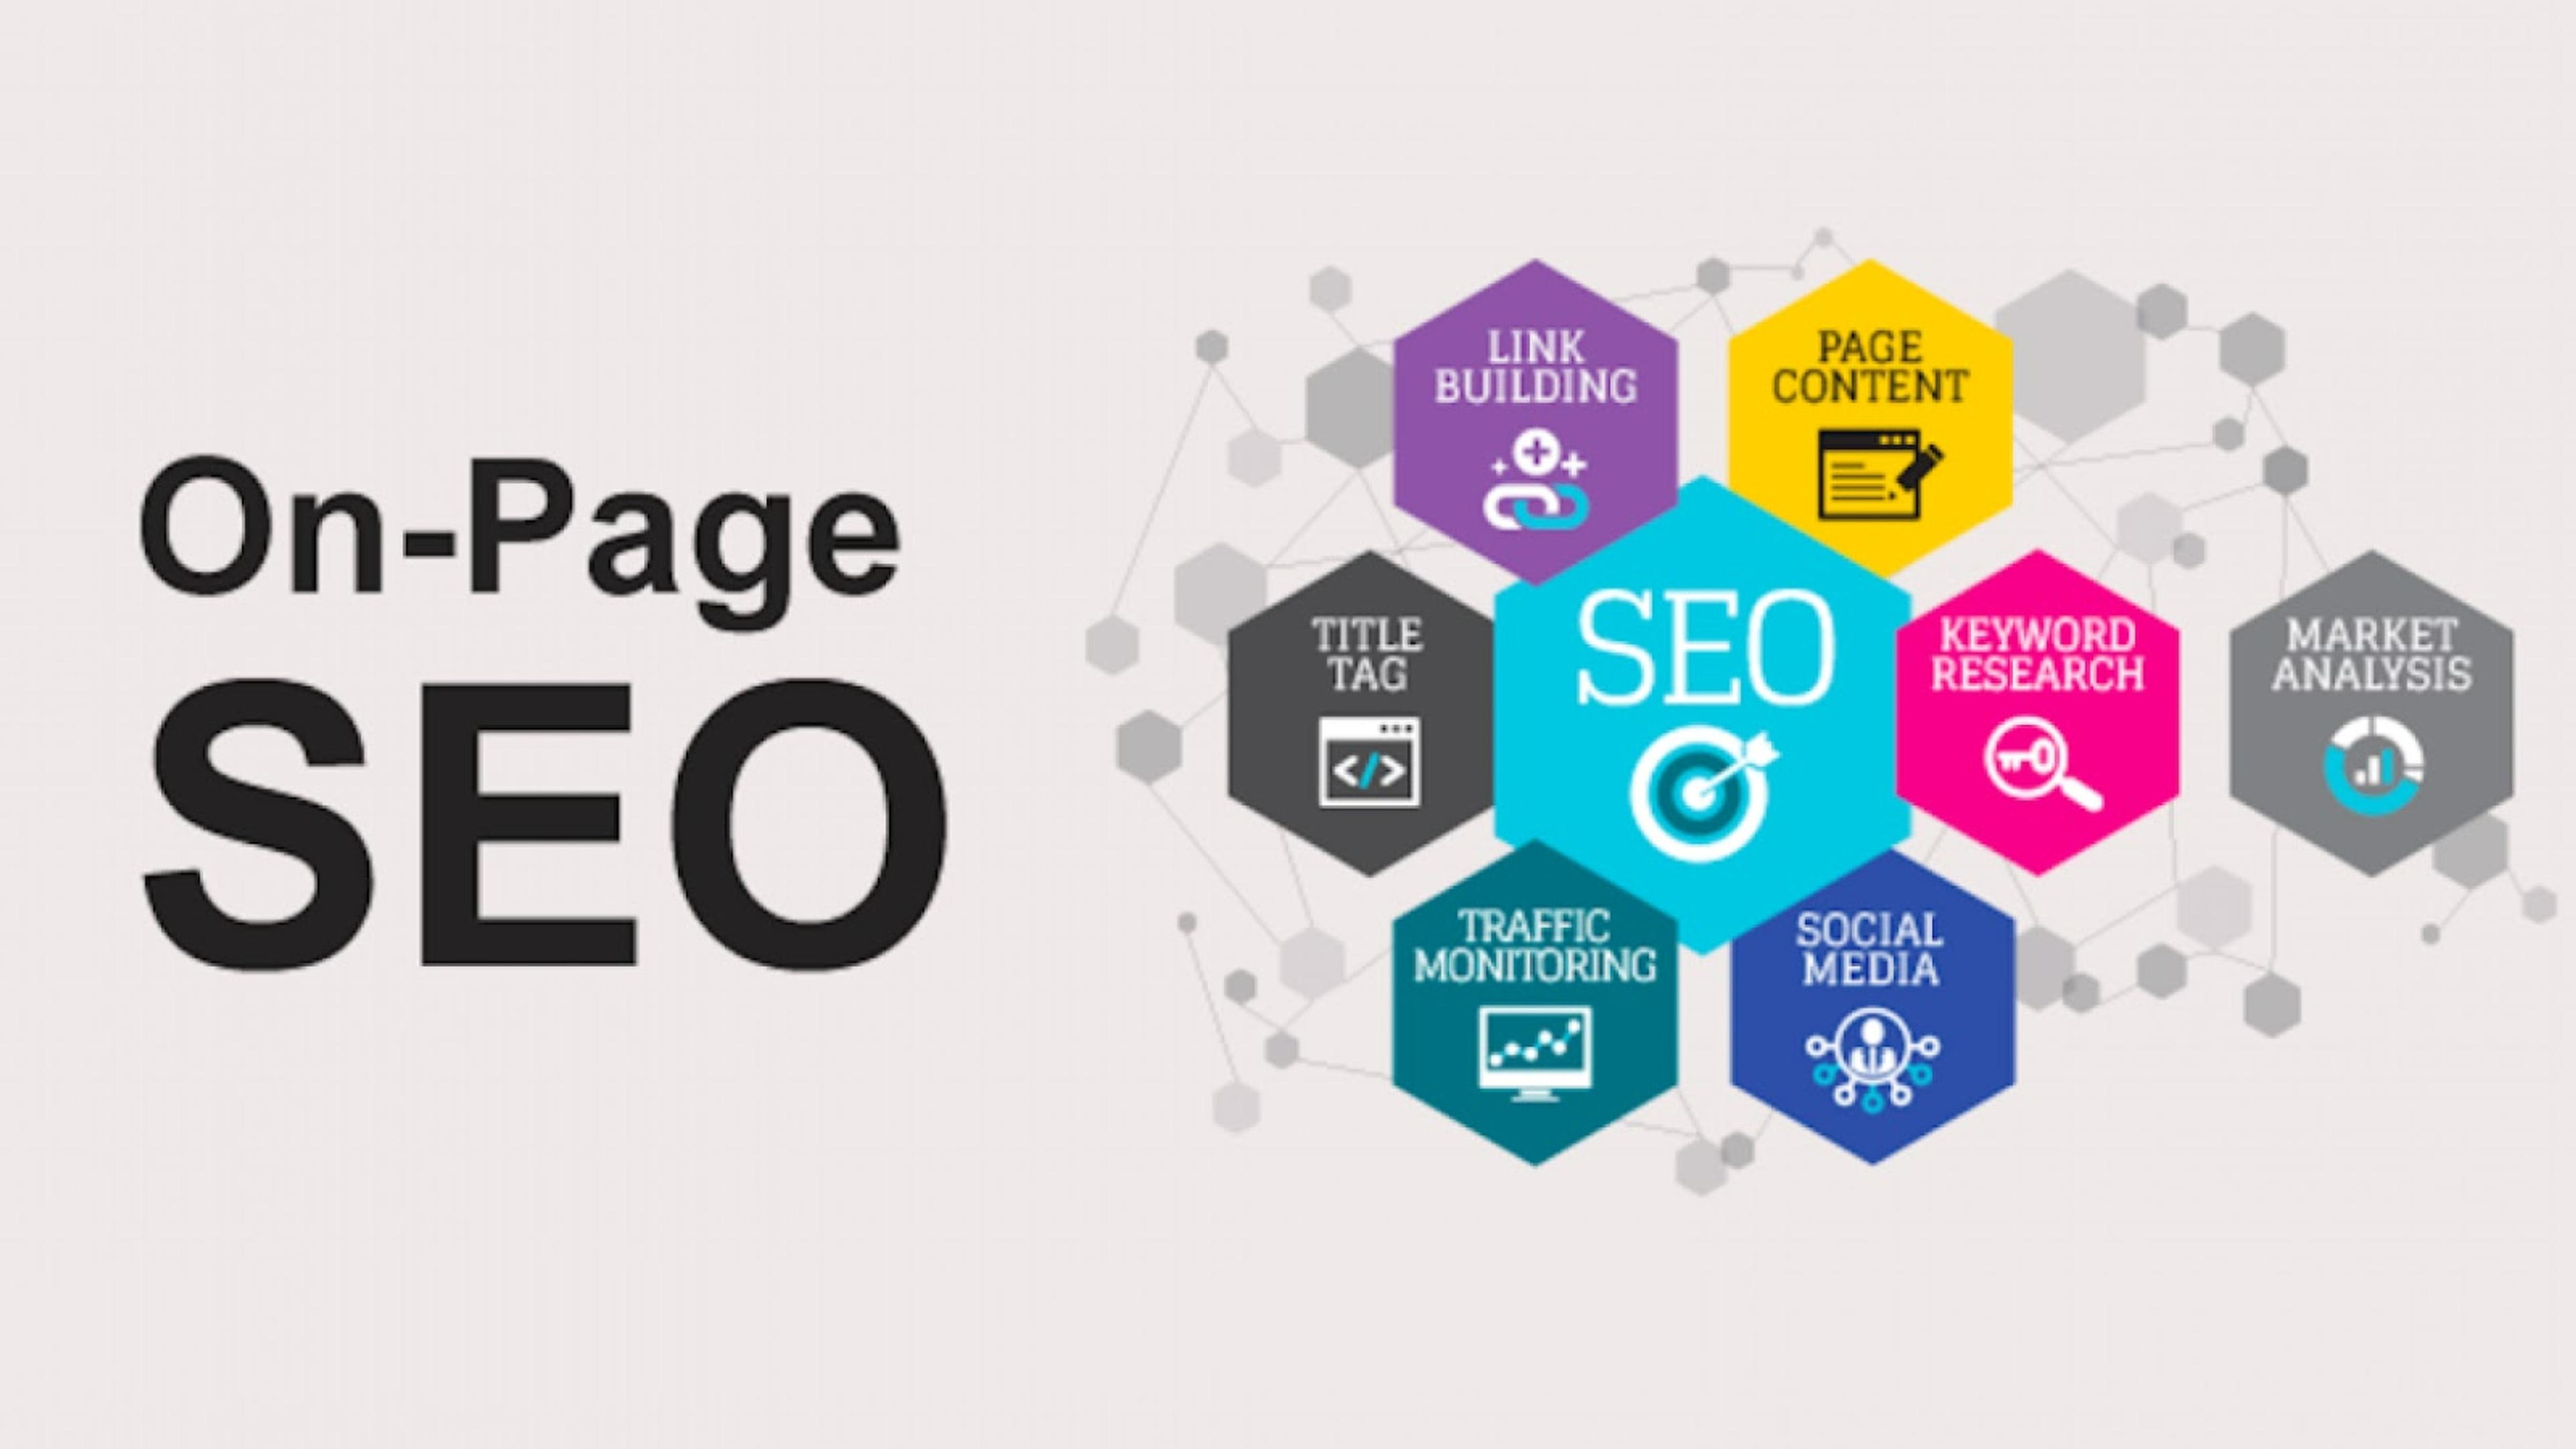 What Is On-Page SEO?